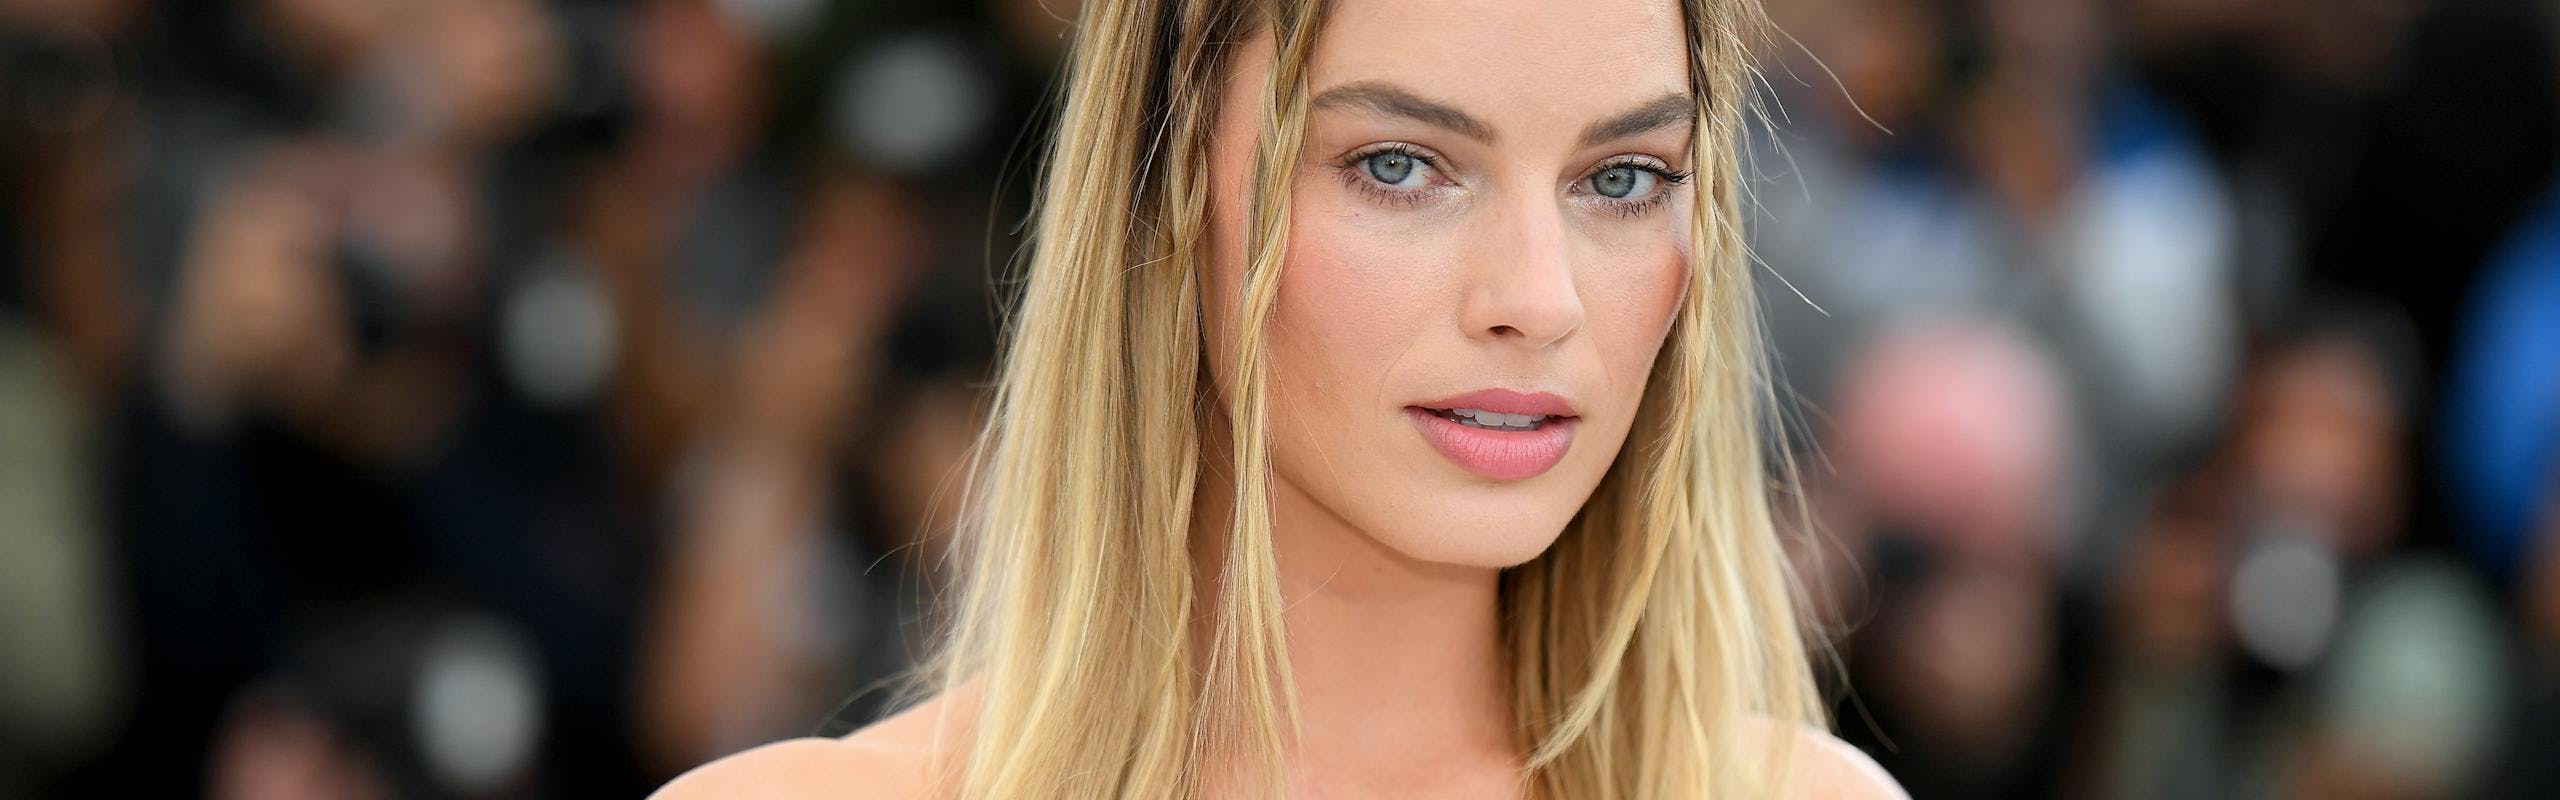 Actress Margot Robbie at the 72nd annual Cannes Film Festival in 2019